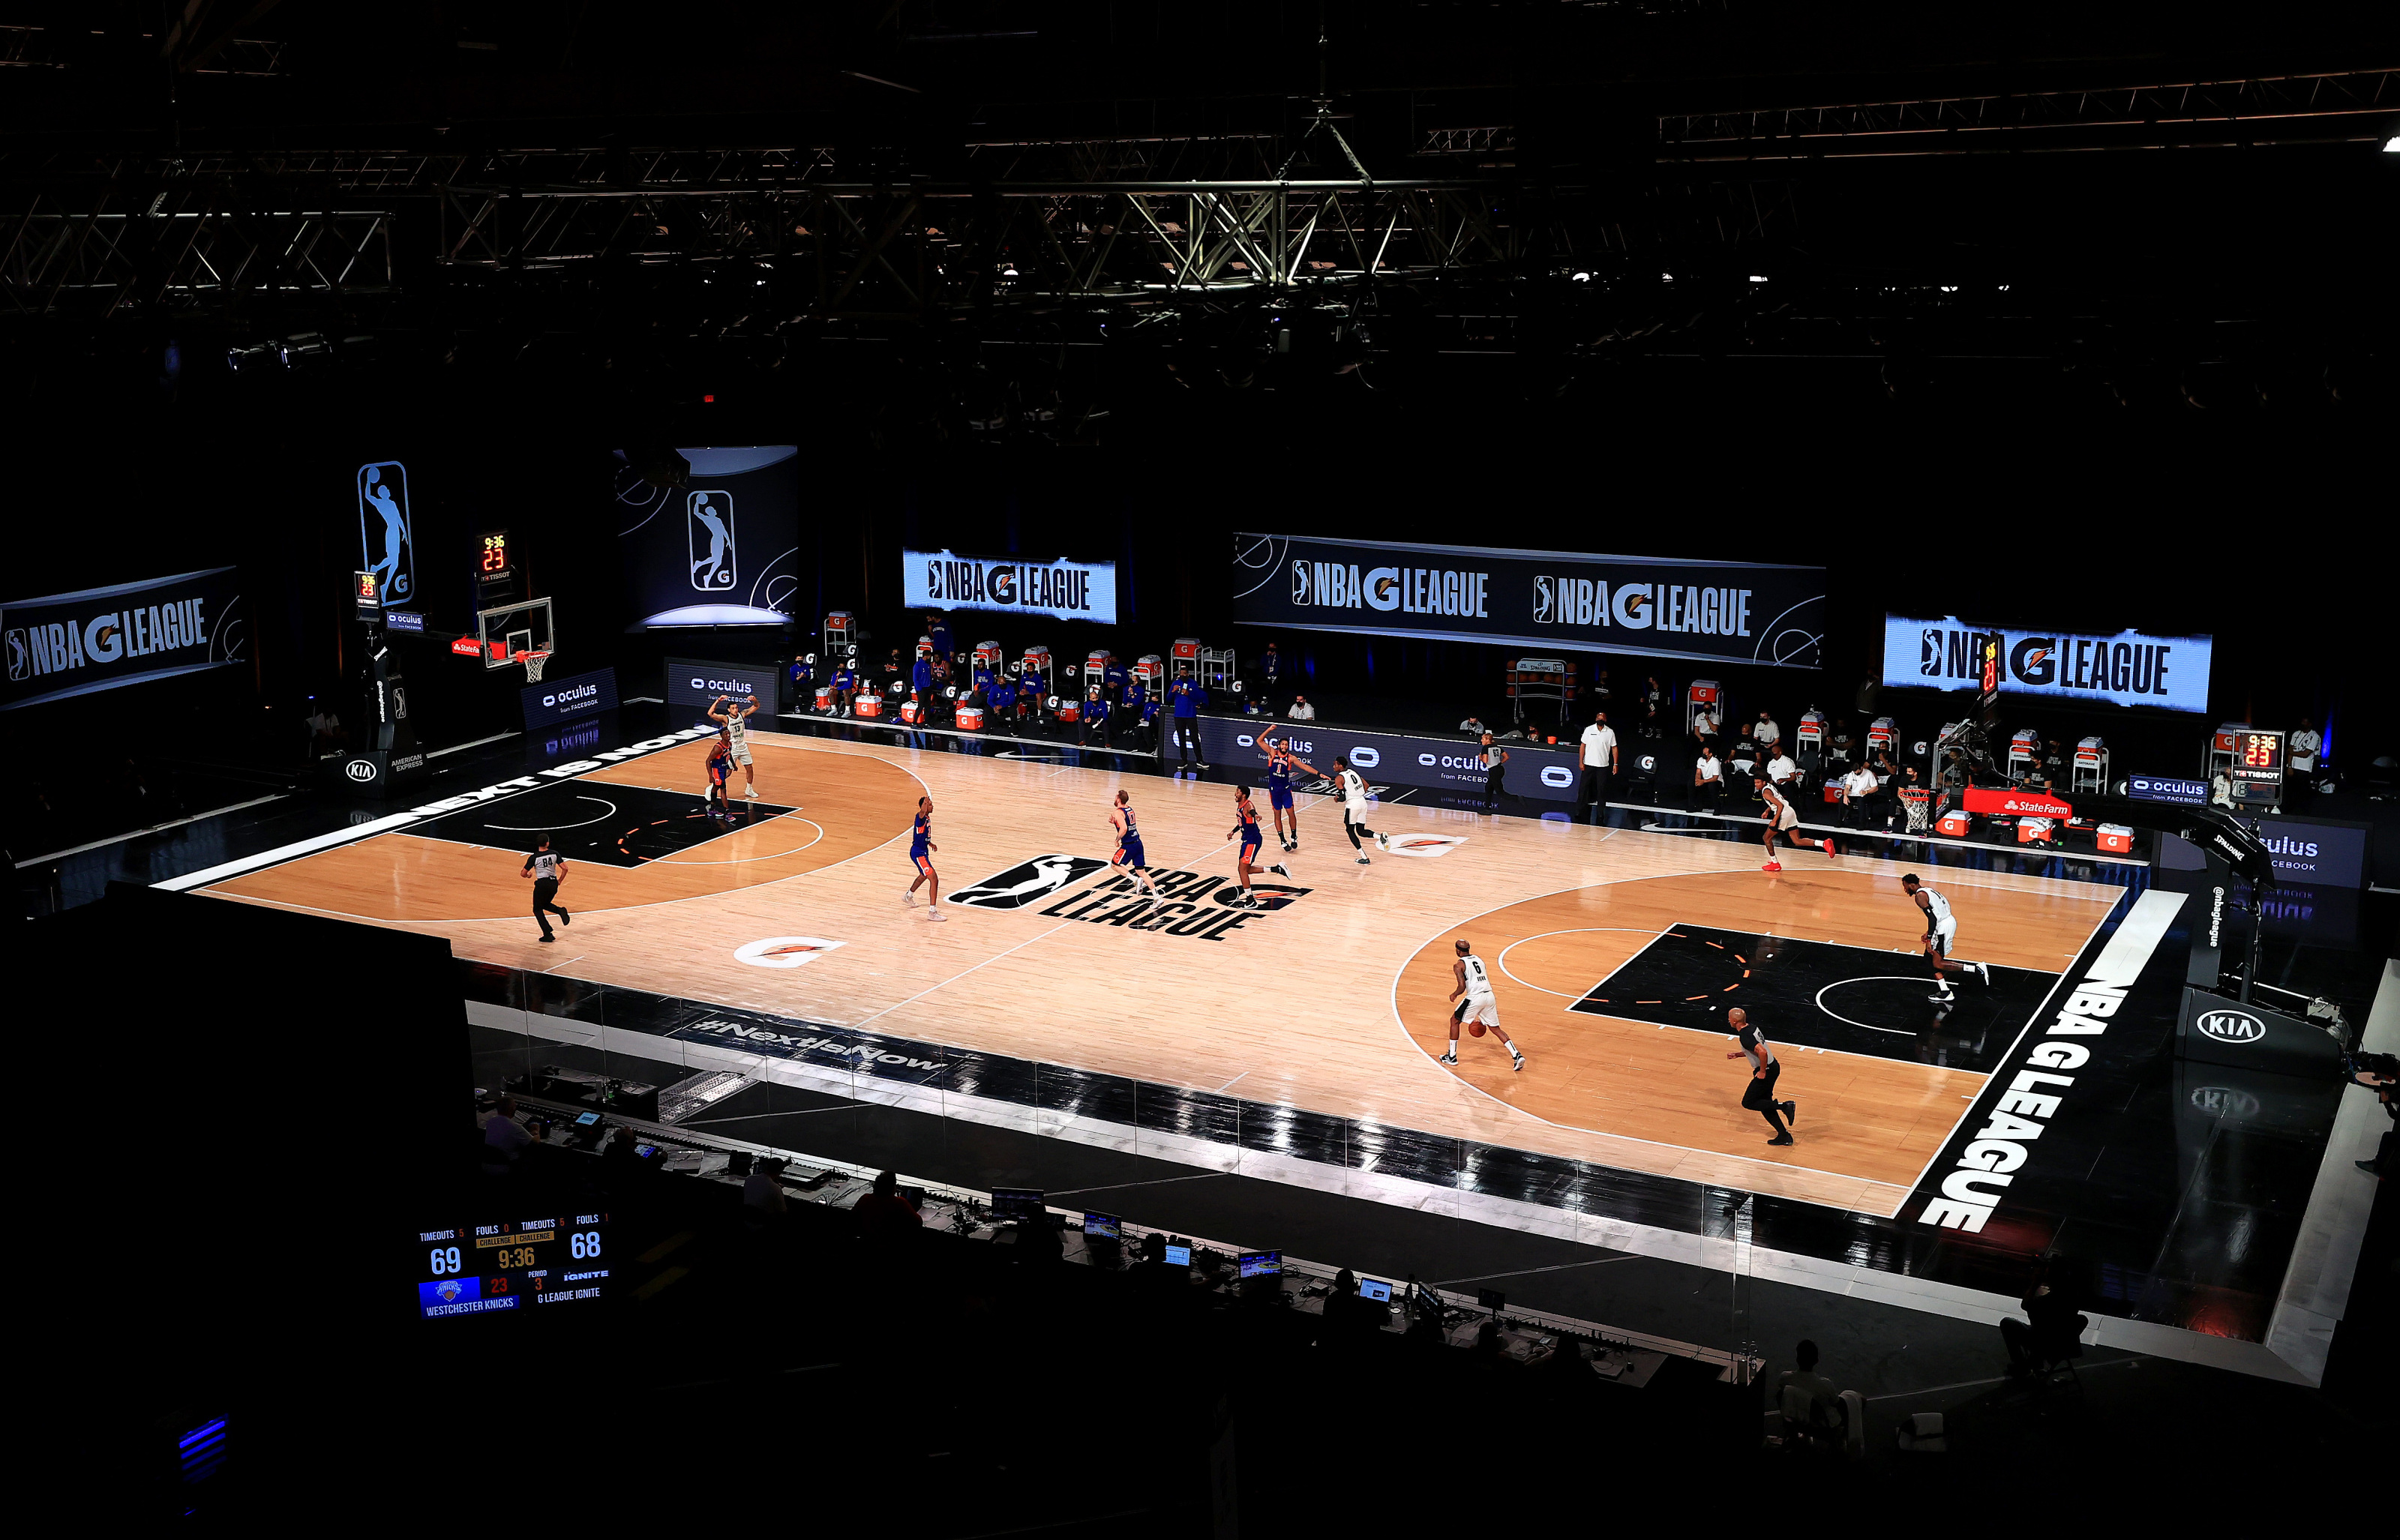 A general view of the H-E-B Center during the NBA G-League game News  Photo - Getty Images